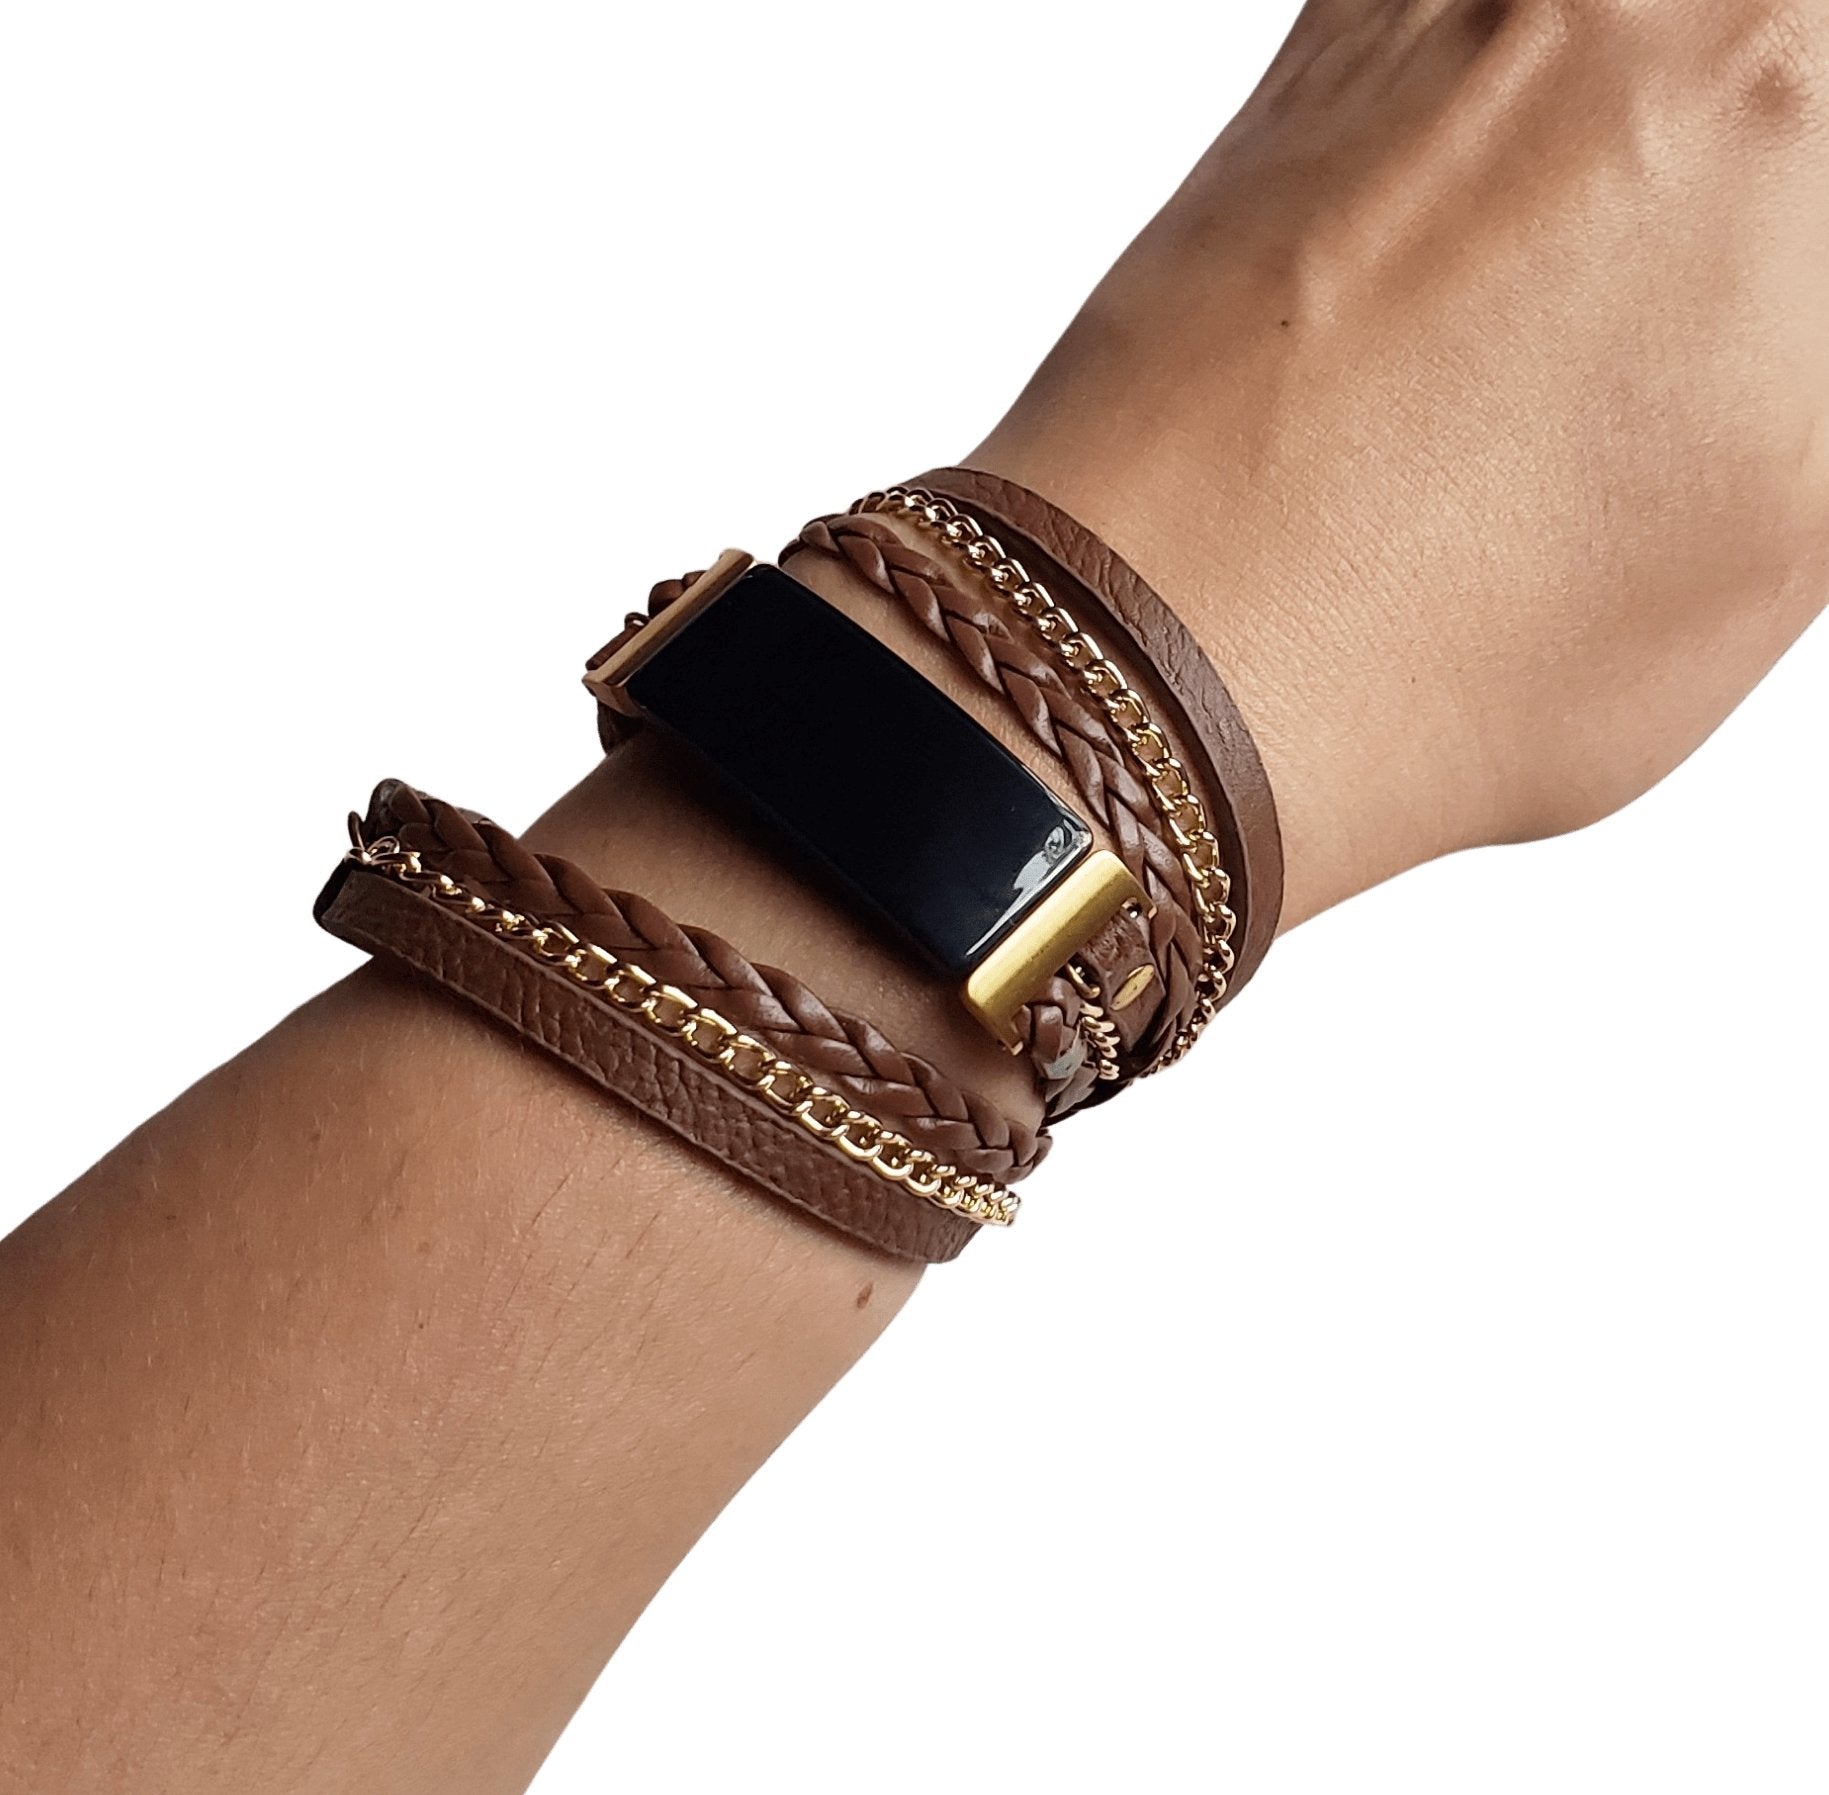 Boho Chic Vegan Leather Braided Watch Bracelet Band for Fitbit Luxe